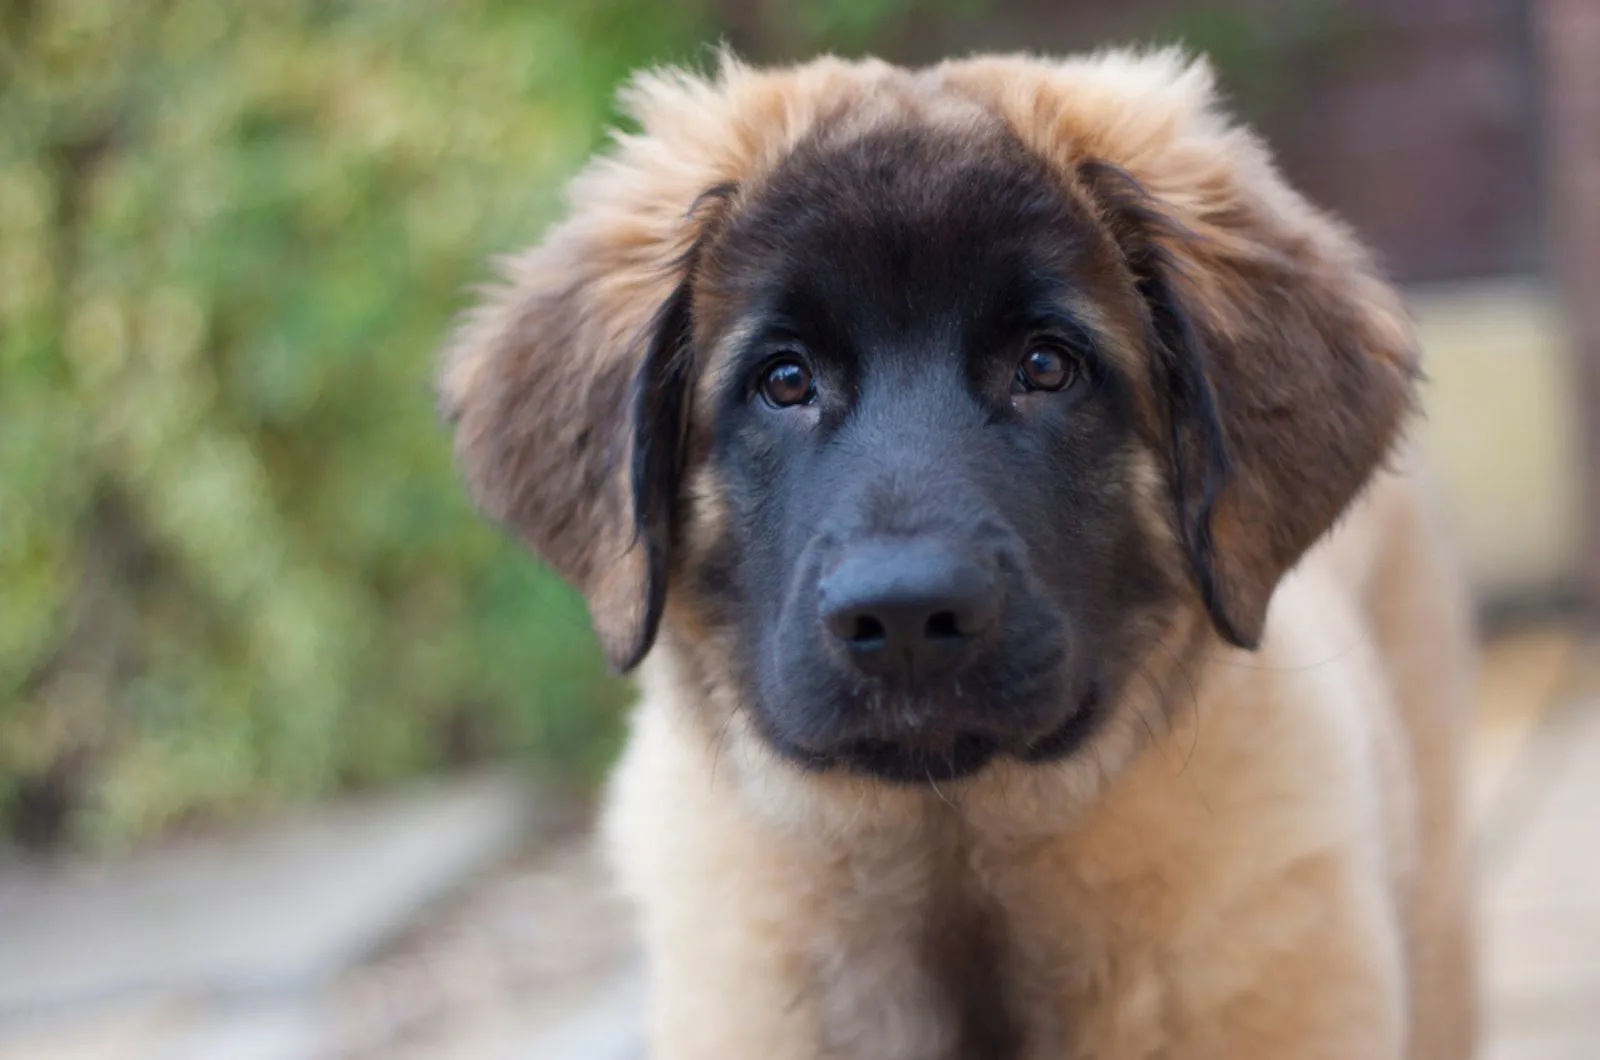 adorable leonberger puppy looking into camera